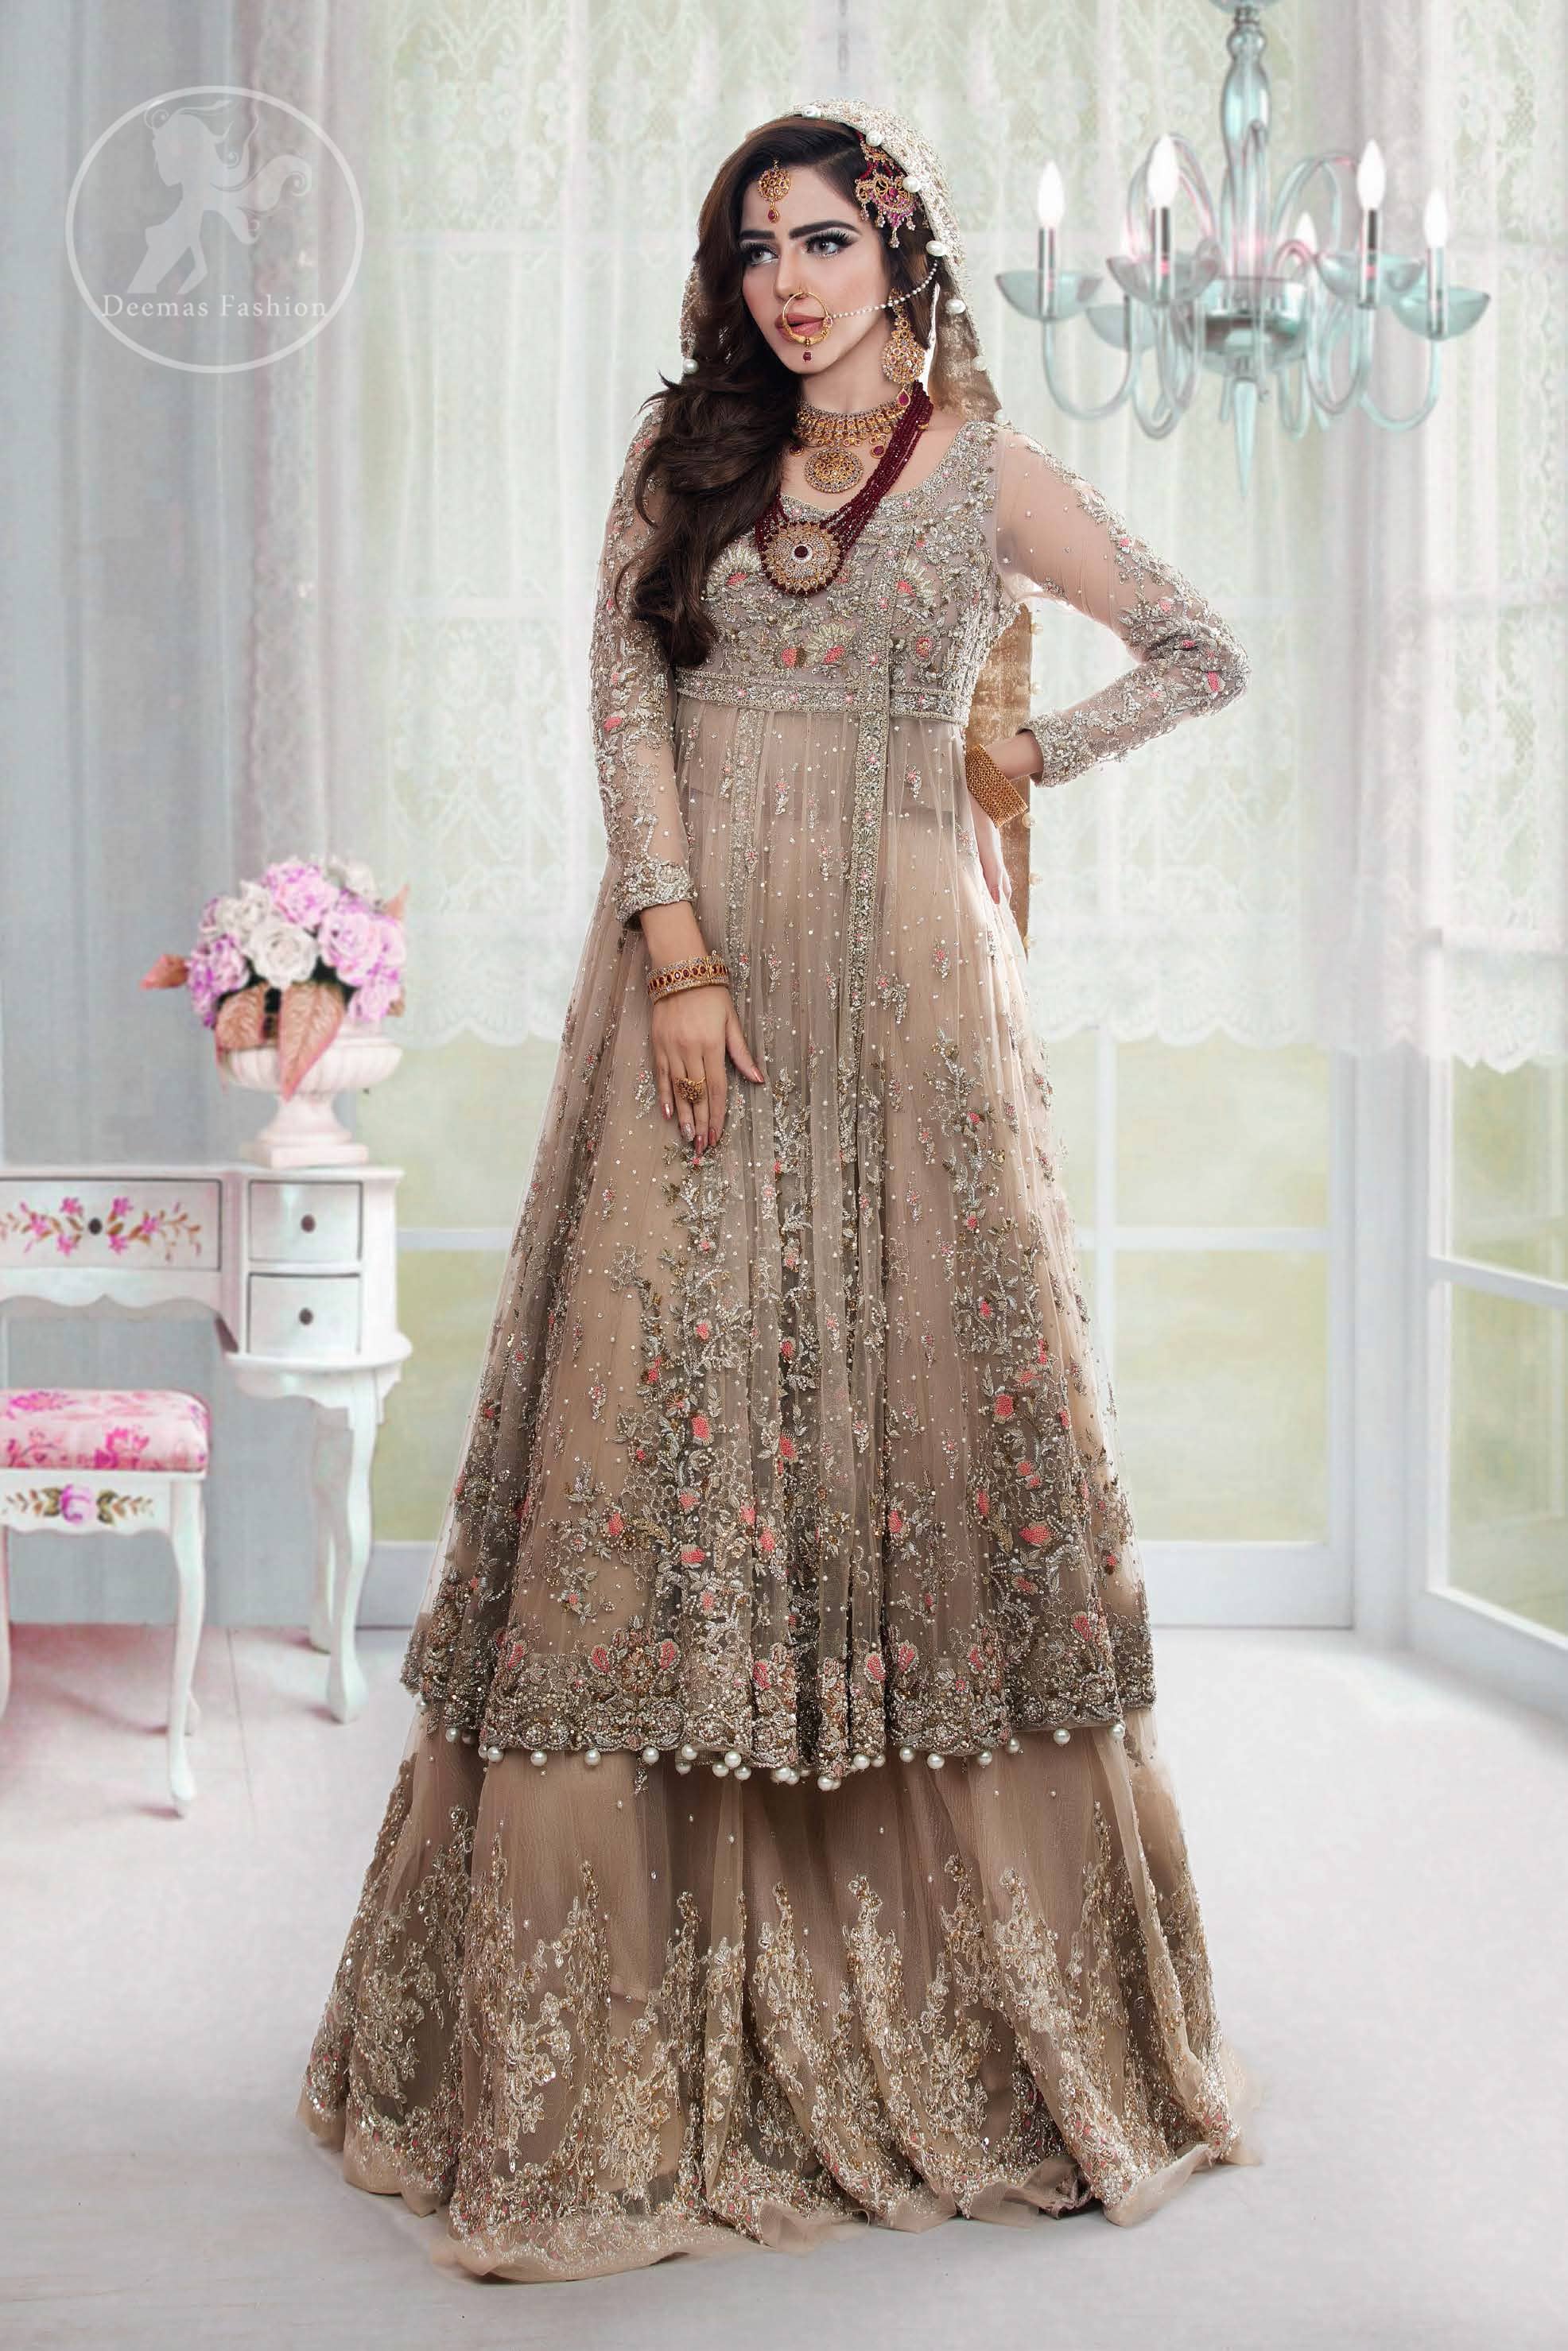 This outfit is meticulously featuring antique shades of kora, dabka, tilla, sequins and pearls.